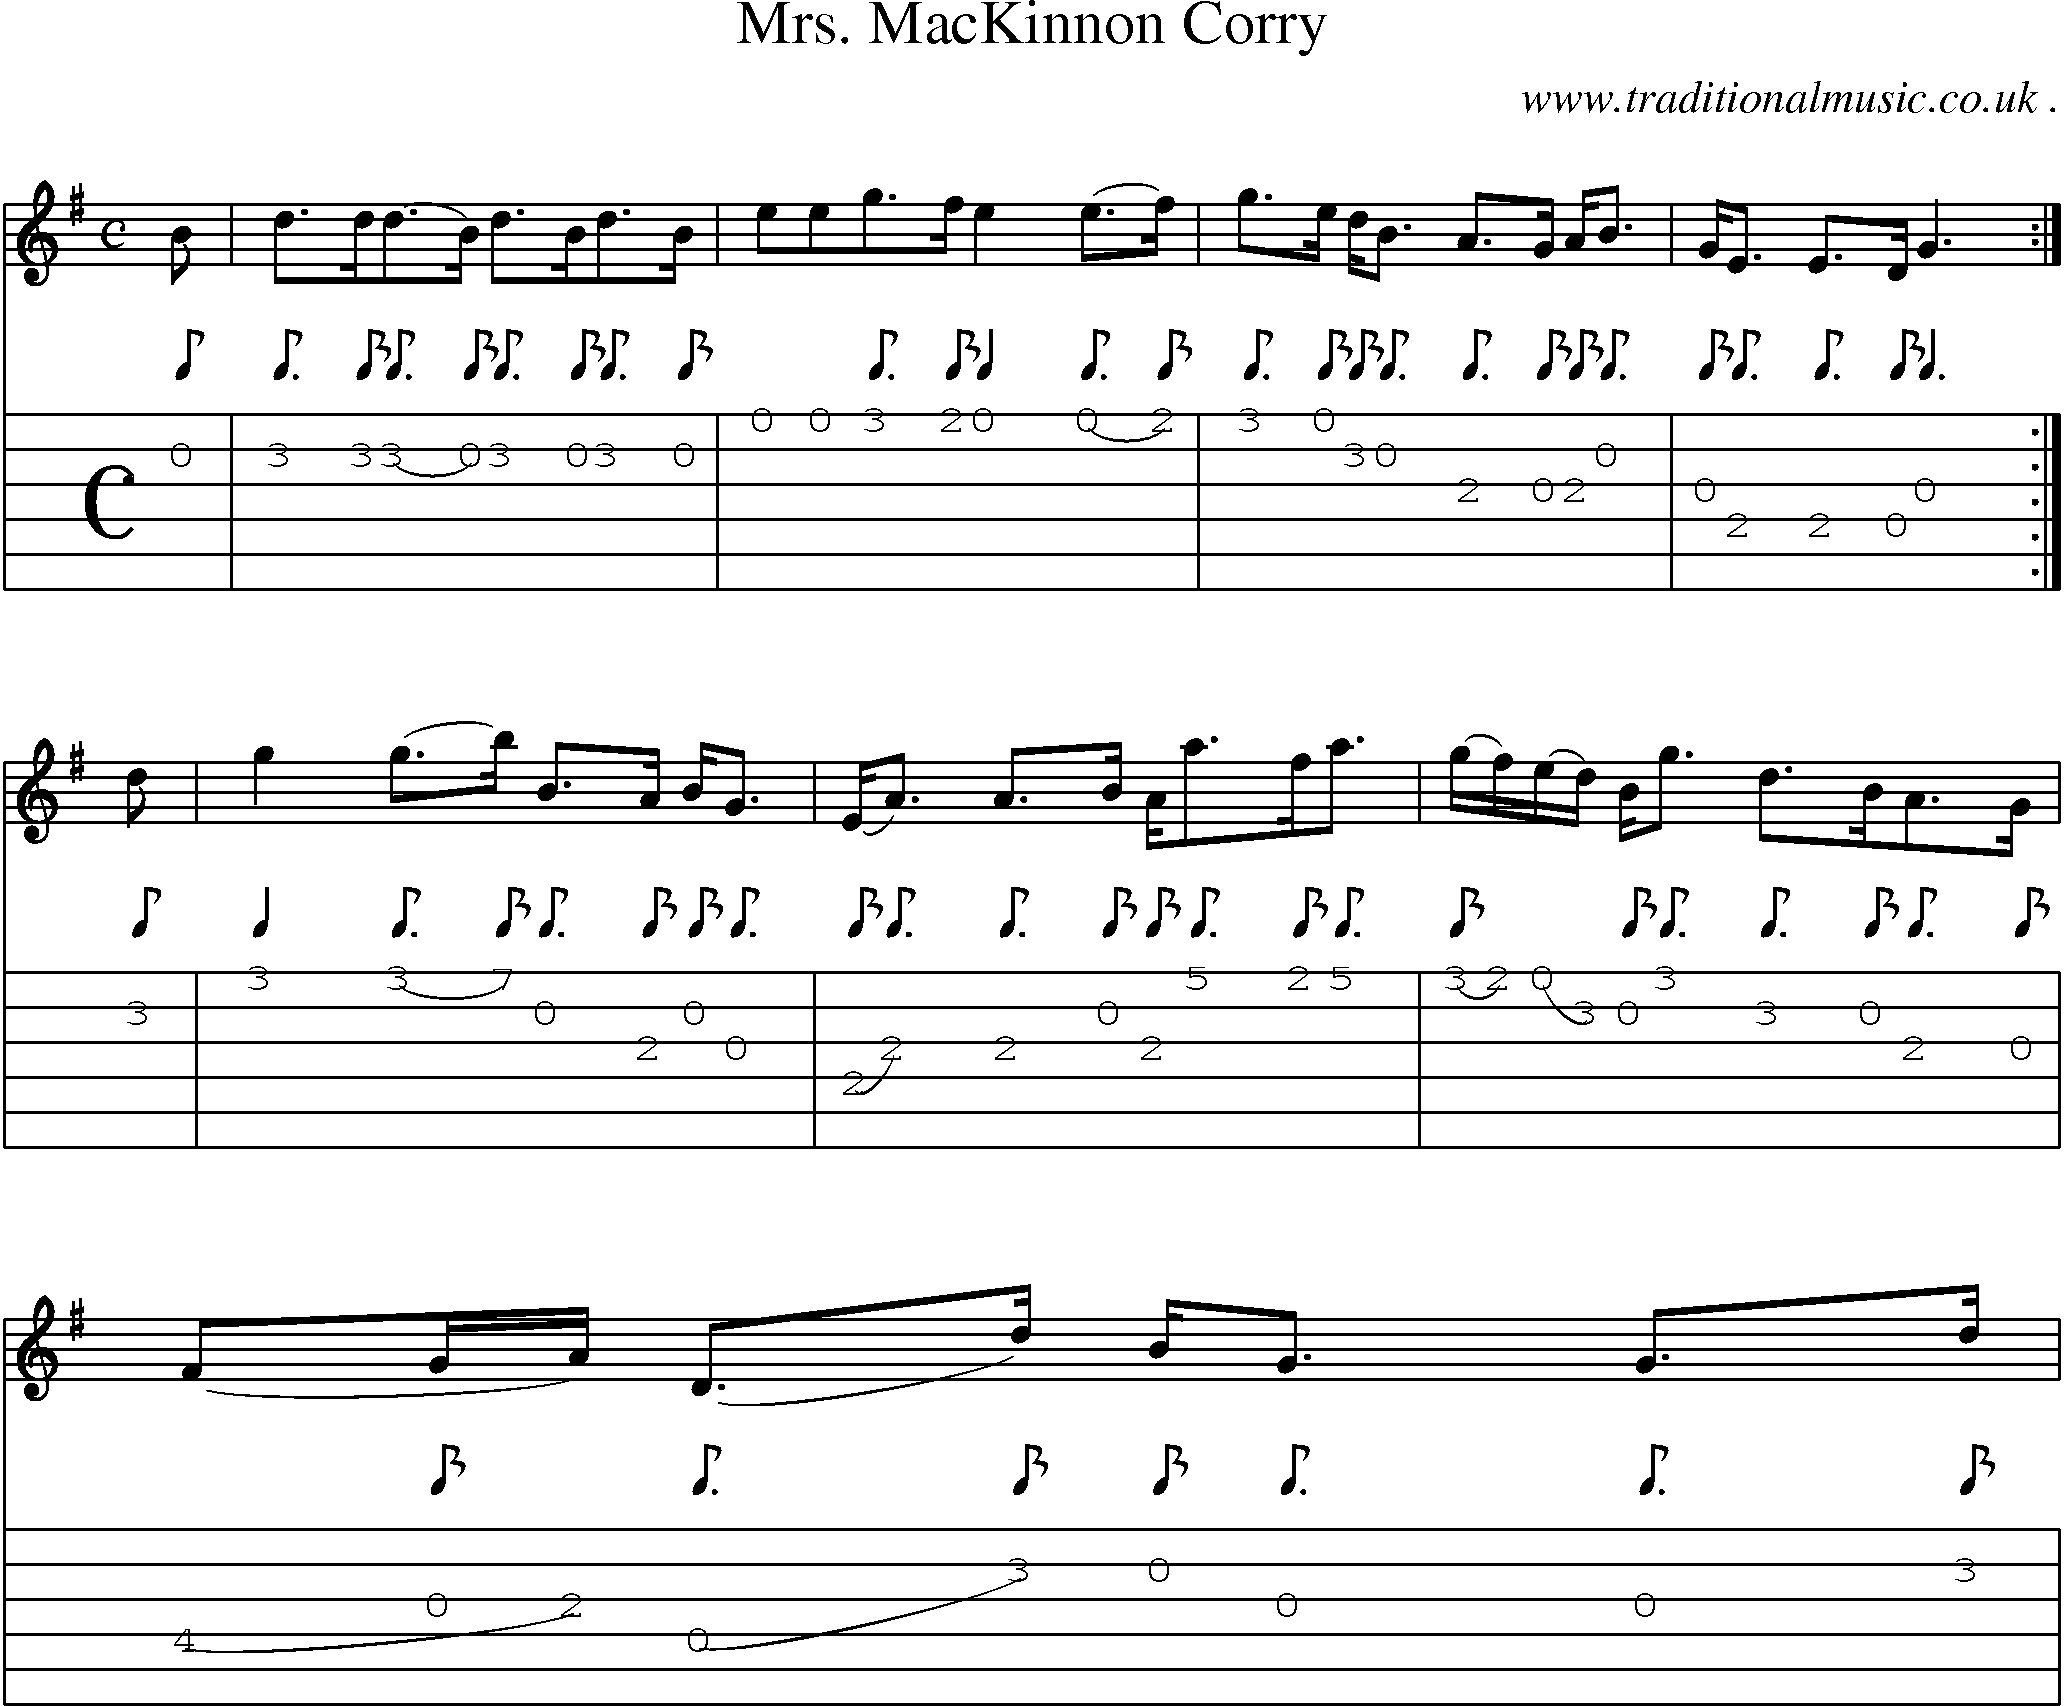 Sheet-music  score, Chords and Guitar Tabs for Mrs Mackinnon Corry